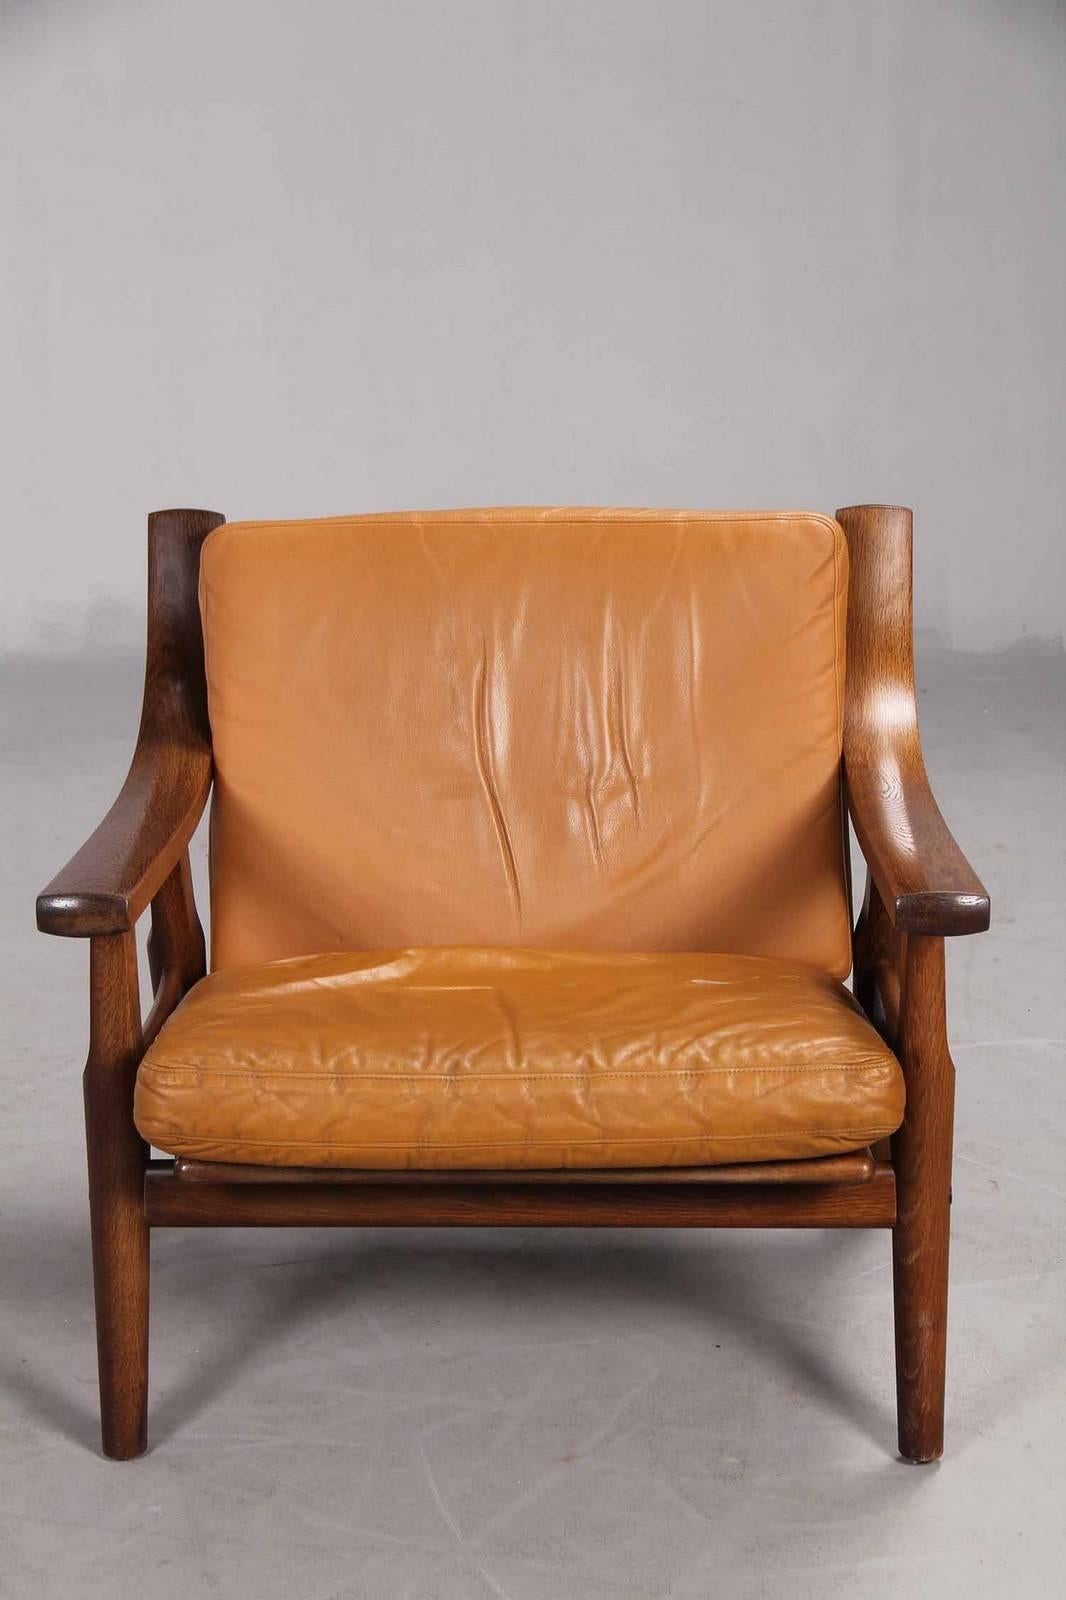 Low-backed armchair designed by Danish designer Hans Wegner in 1973. The frame of dark-stained oak with spoke back. The chair upholstered in cognac-colored leather. The chair produced by GETAMA, model-GE-530.